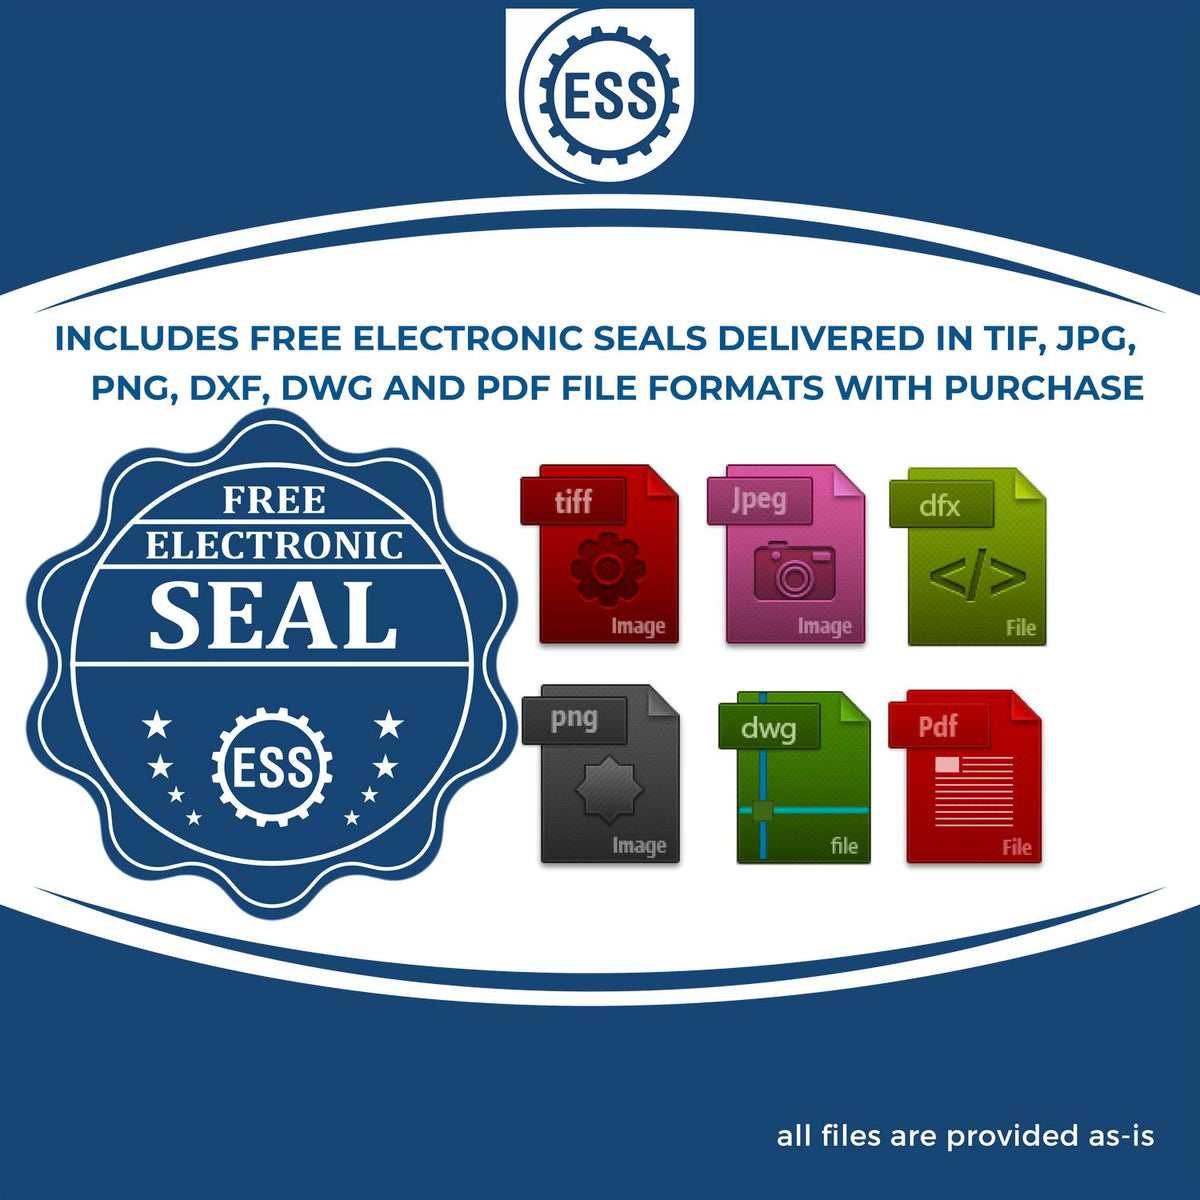 An infographic for the free electronic seal for the State of Hawaii Long Reach Architectural Embossing Seal illustrating the different file type icons such as DXF, DWG, TIF, JPG and PNG.